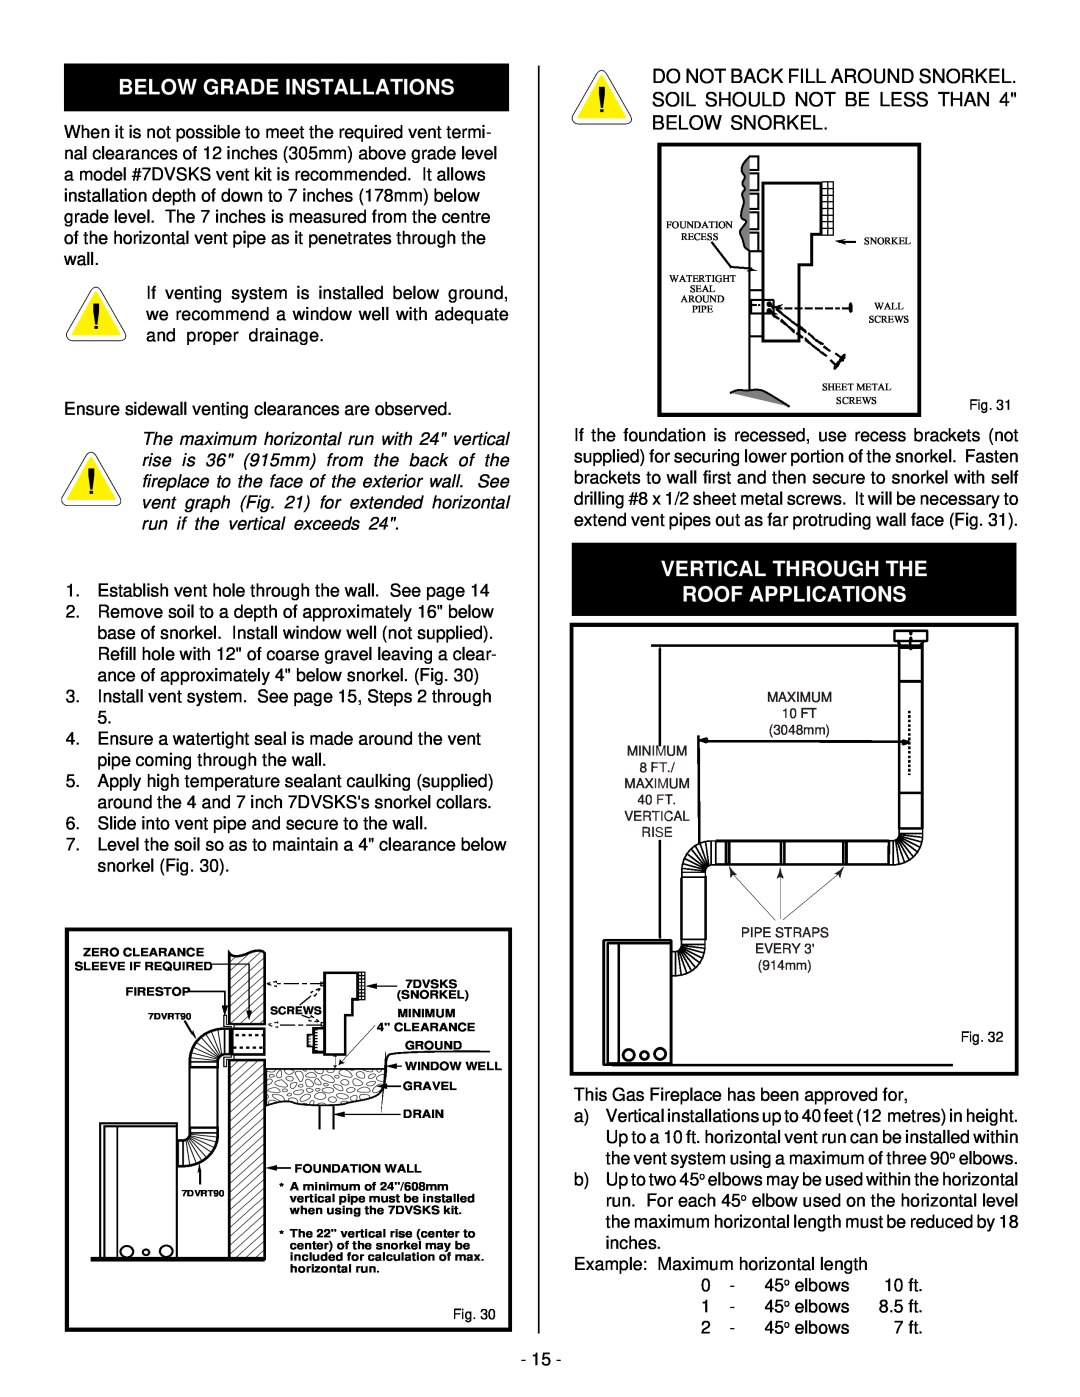 Vermont Casting BHDR36 installation instructions Below Grade Installations, Vertical Through The Roof Applications 